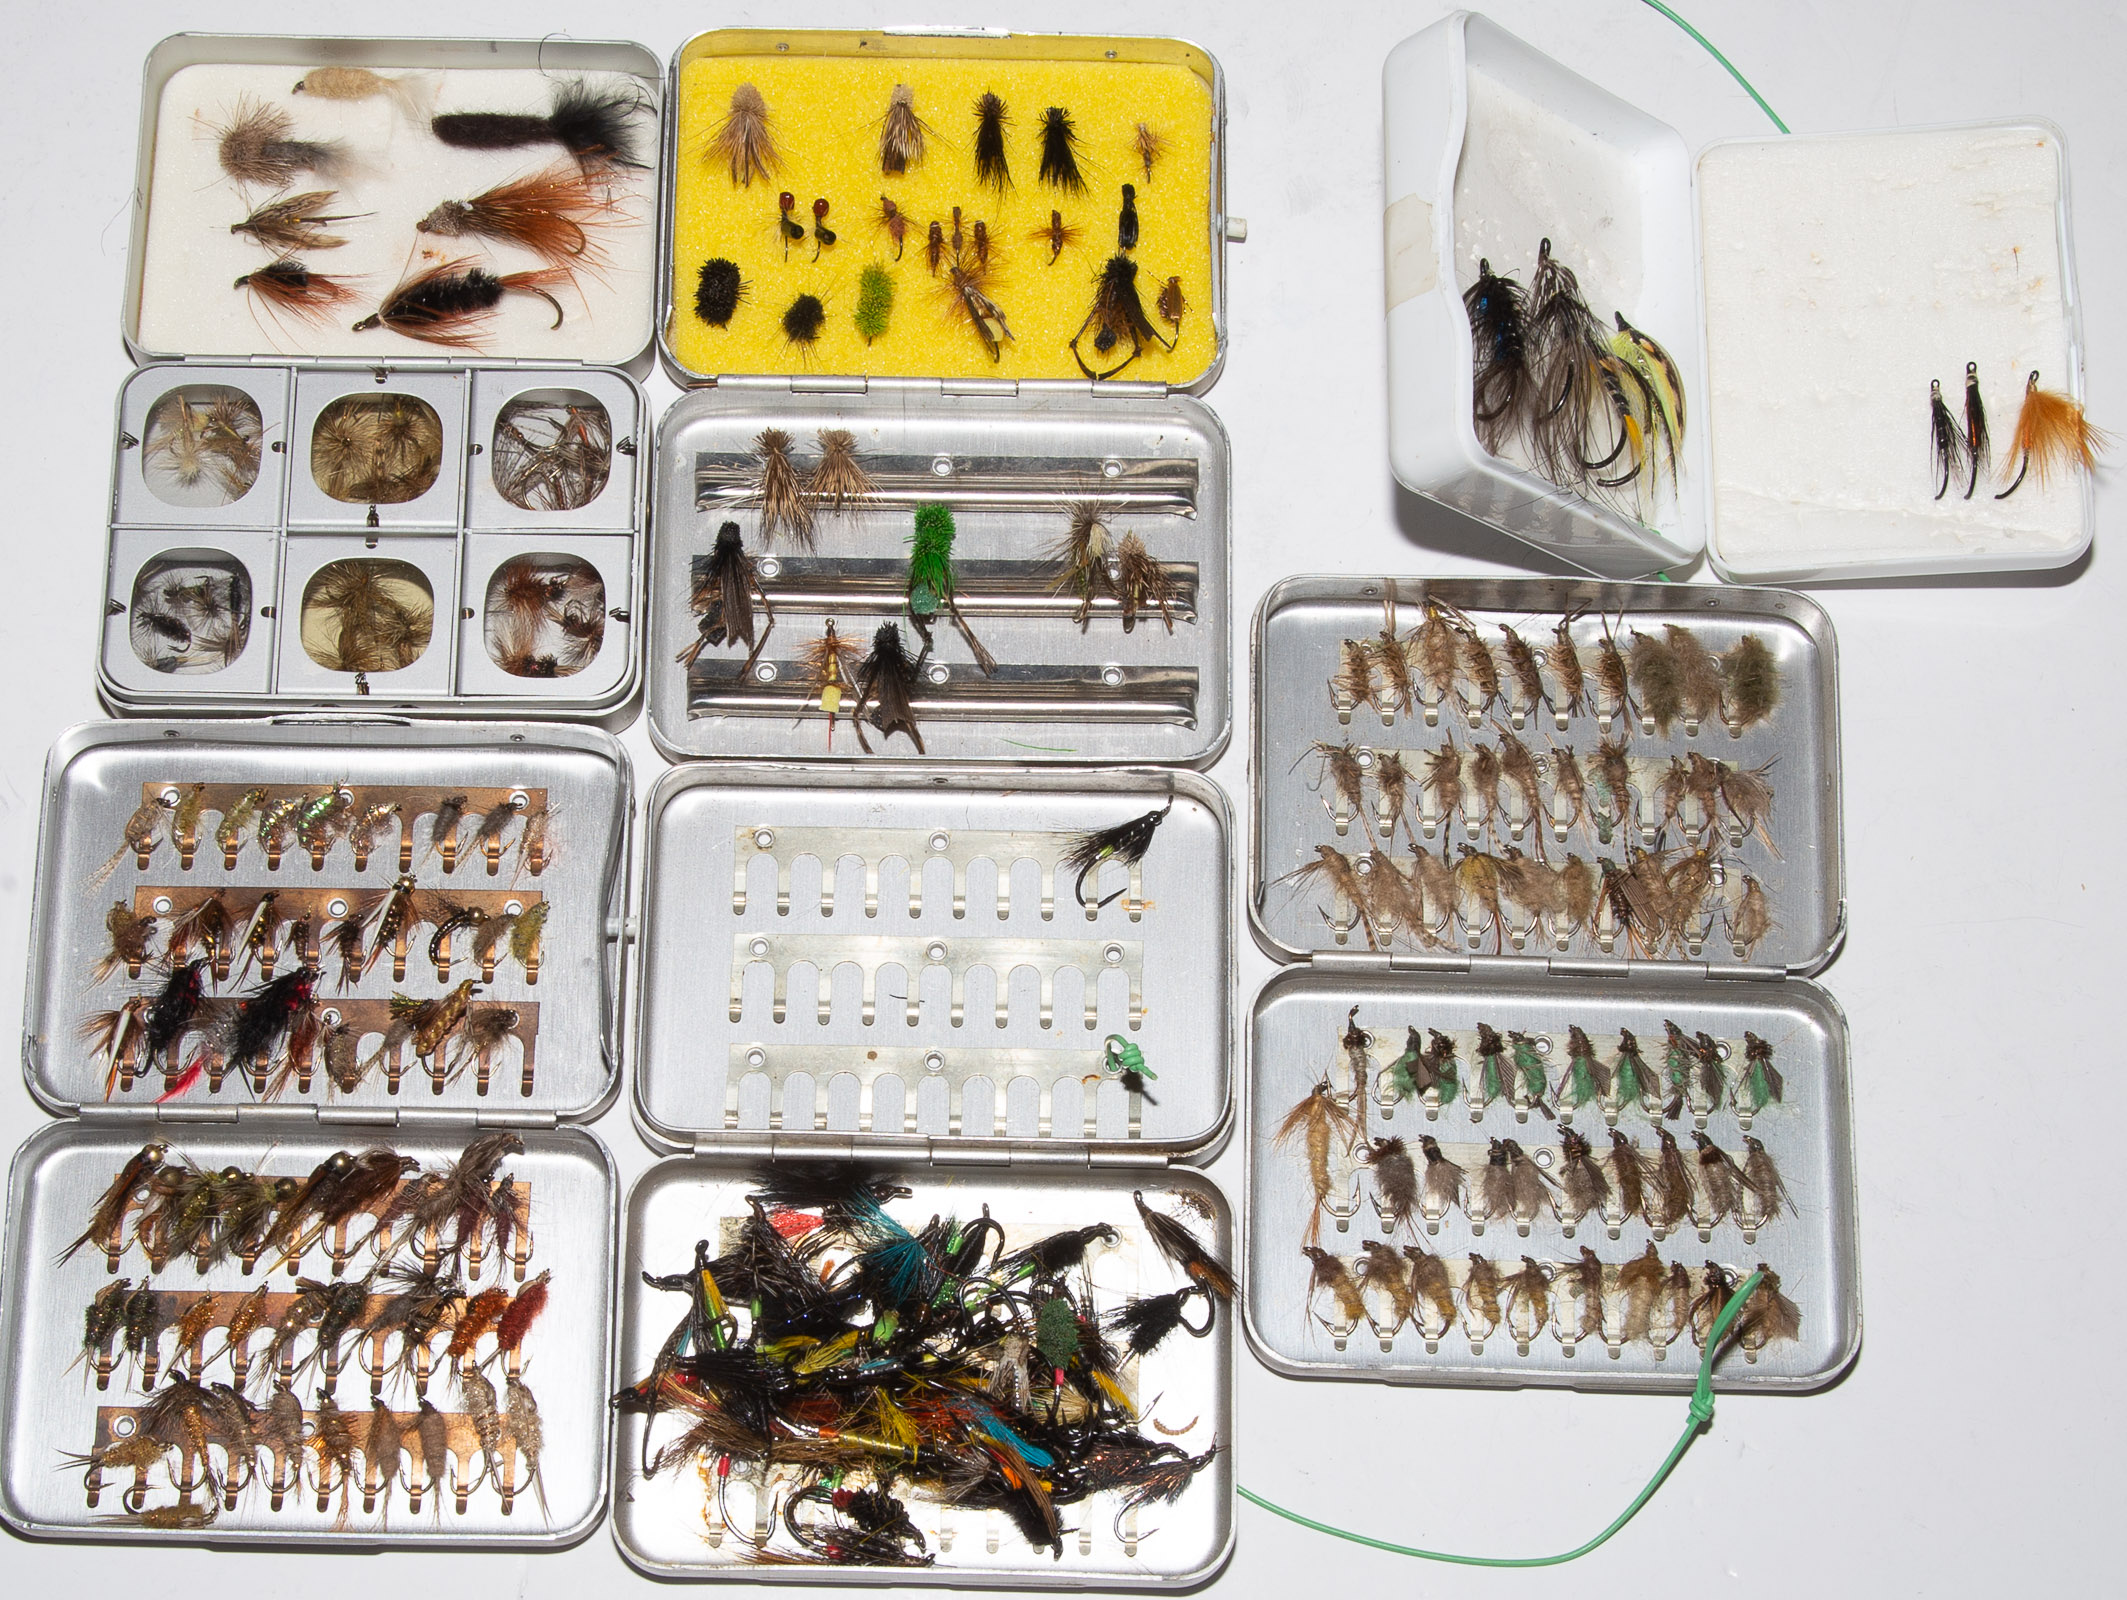 SIX BOXES OF HANDMADE FLY FISHING LURES